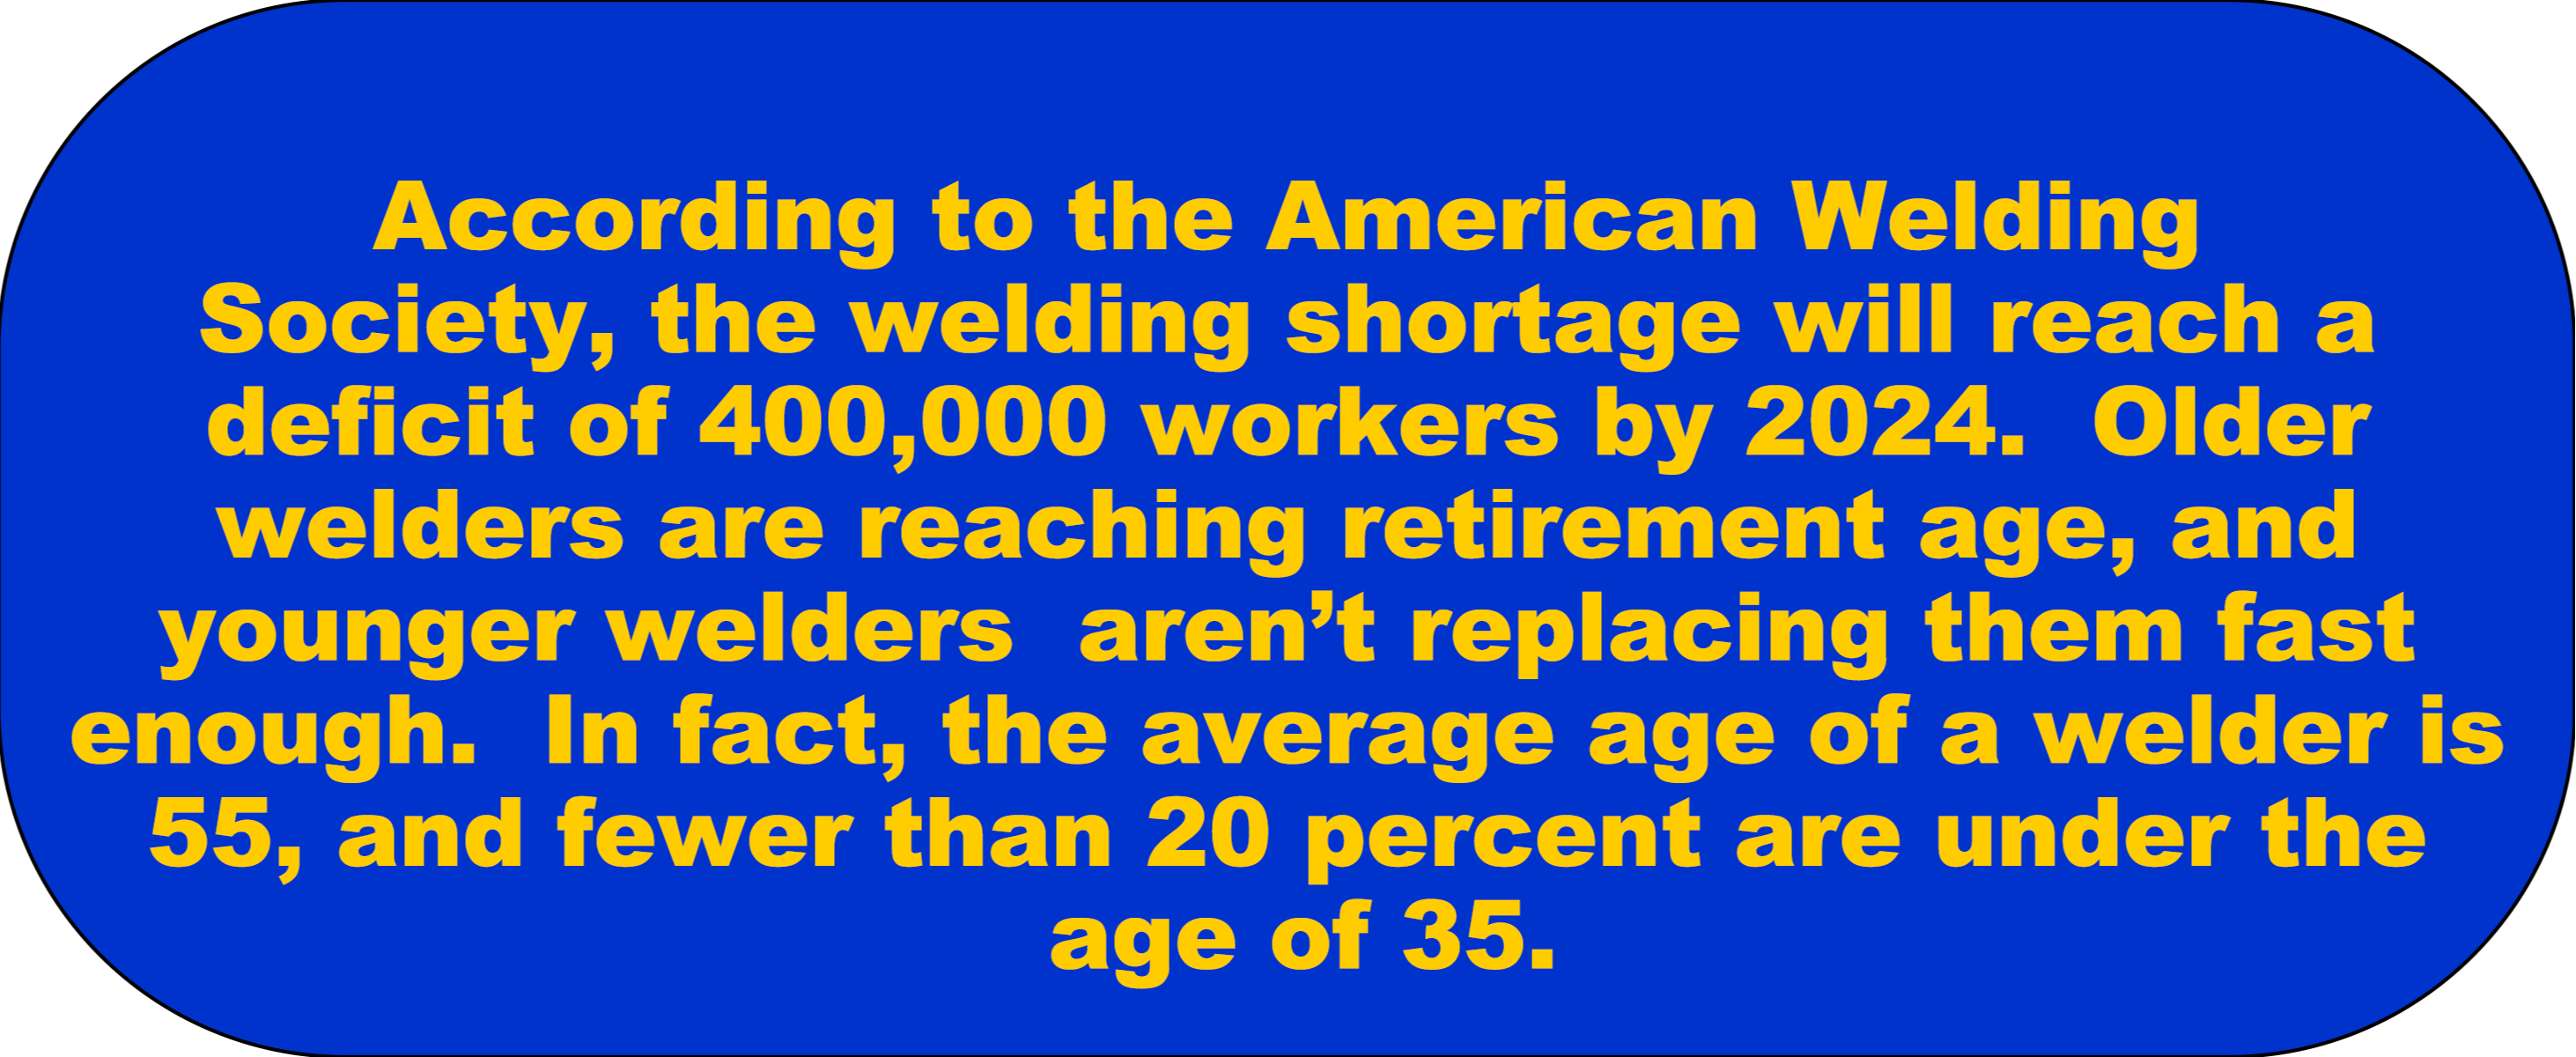 According to the American Welding Society, the welding shortage will reach a deficit of 400,000 workers by 2024. Older welders are reaching retirement age, and younger welders aren’t replacing them fast enough. In fact, the average age of a welder is 55, and fewer than 20 percent are under the age of 35.